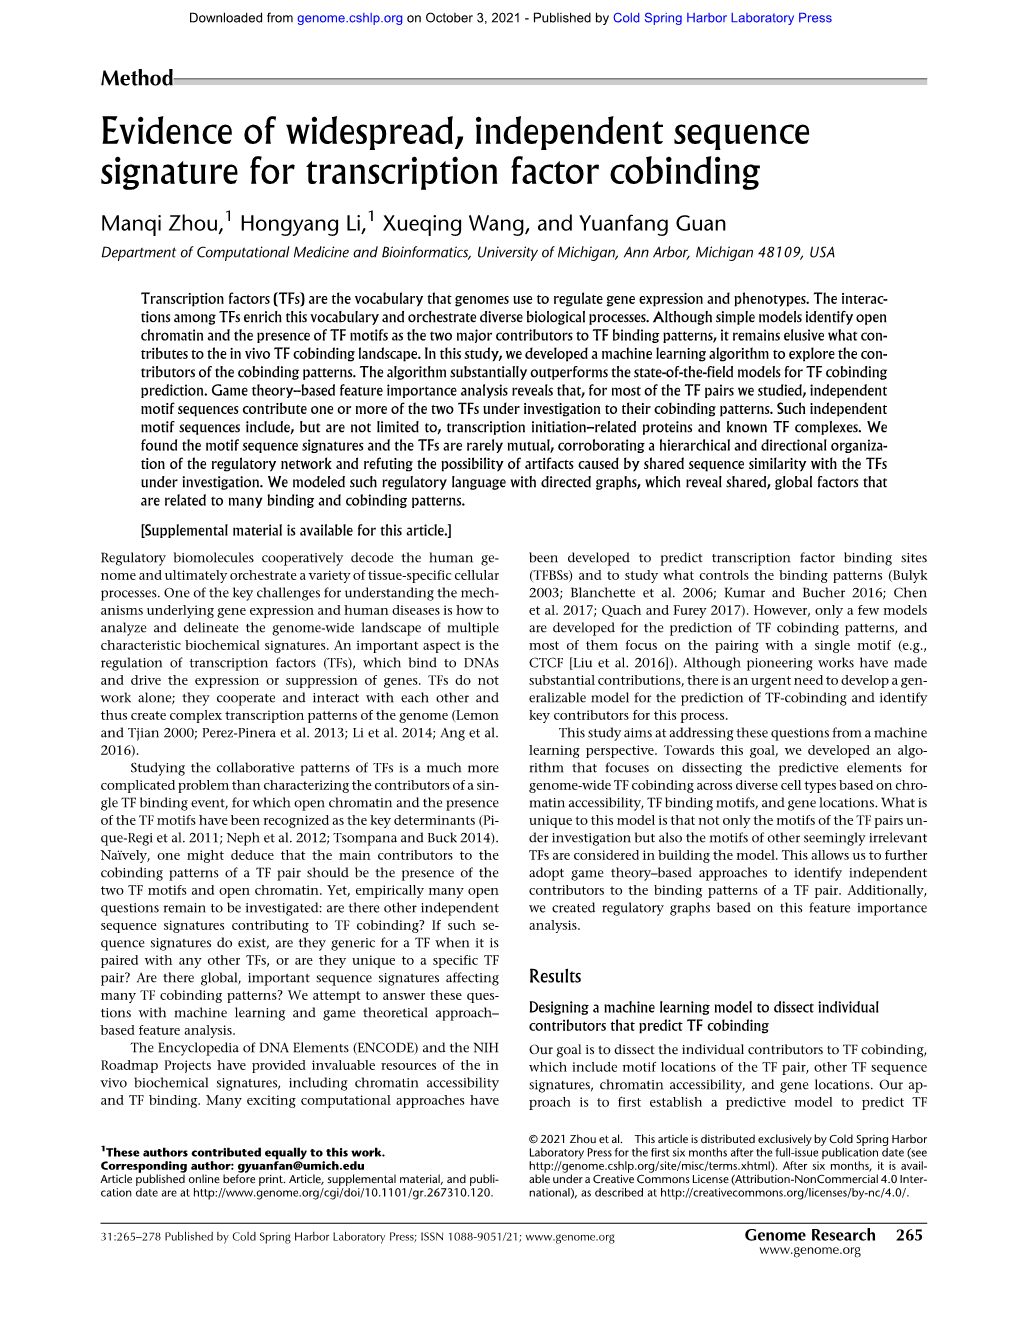 Evidence of Widespread, Independent Sequence Signature for Transcription Factor Cobinding